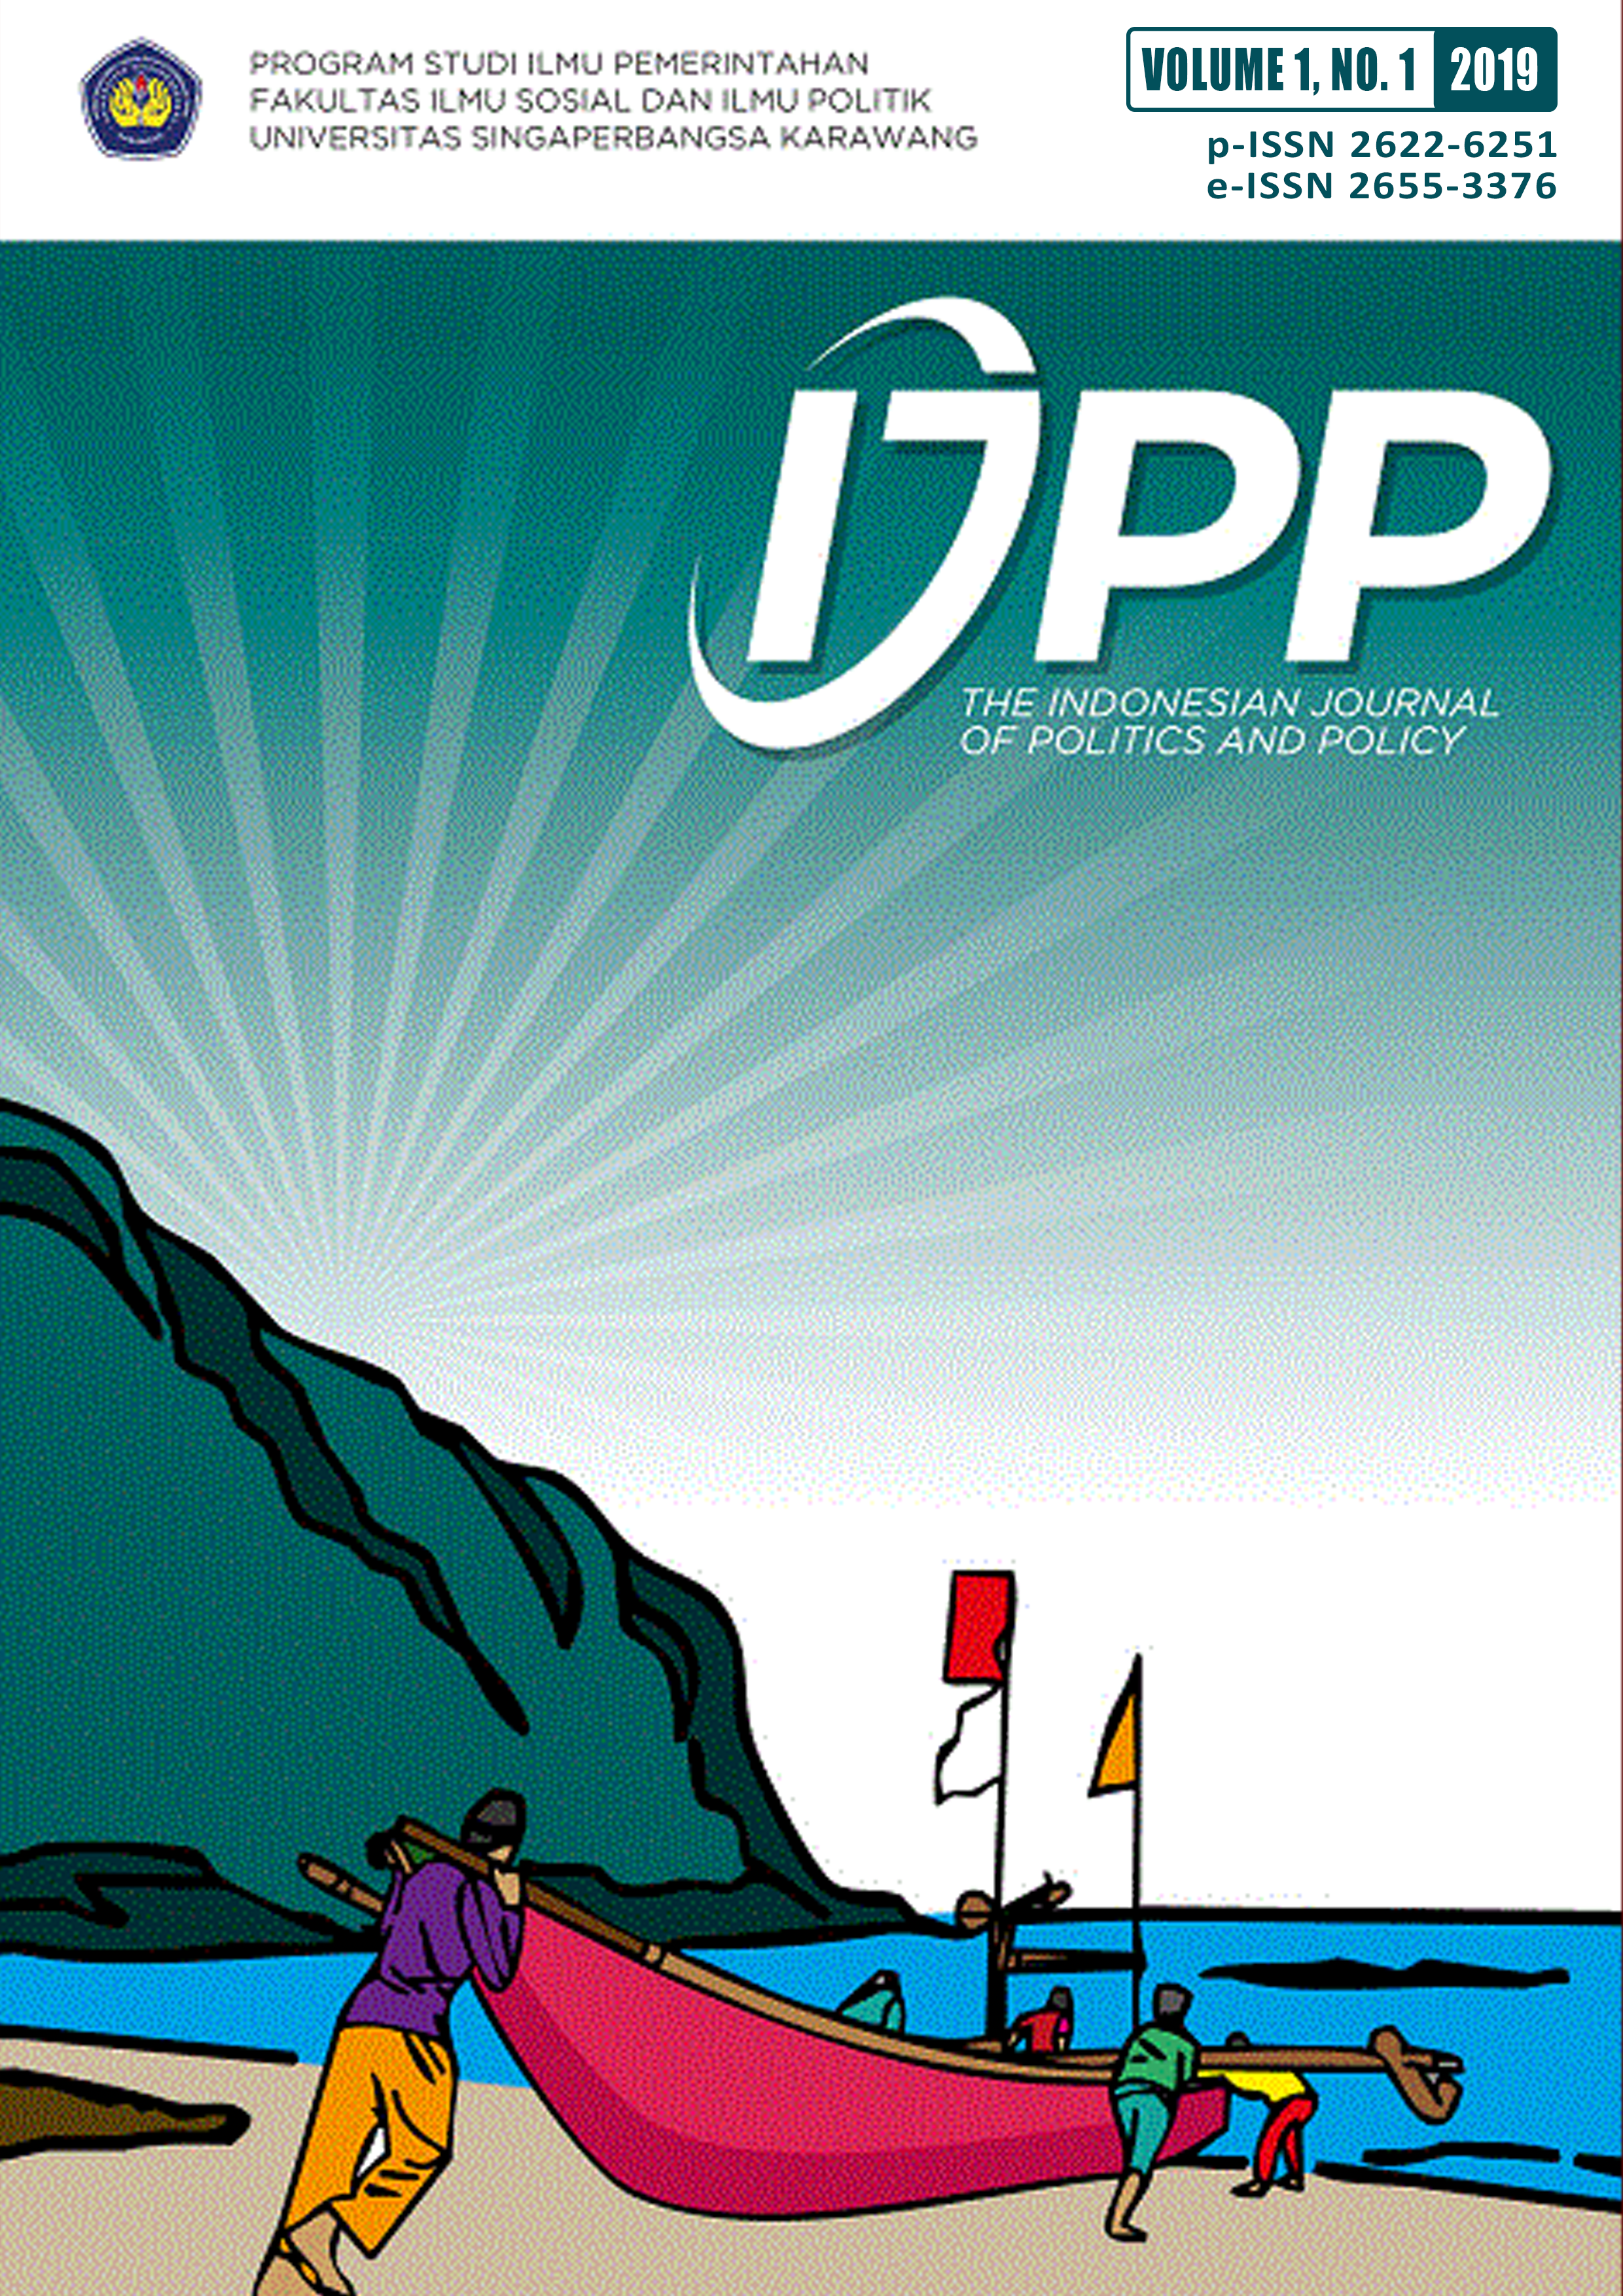 					Lihat Vol 1 No 1 (2019): THE INDONESIAN JOURNAL OF POLITICS AND POLICY
				